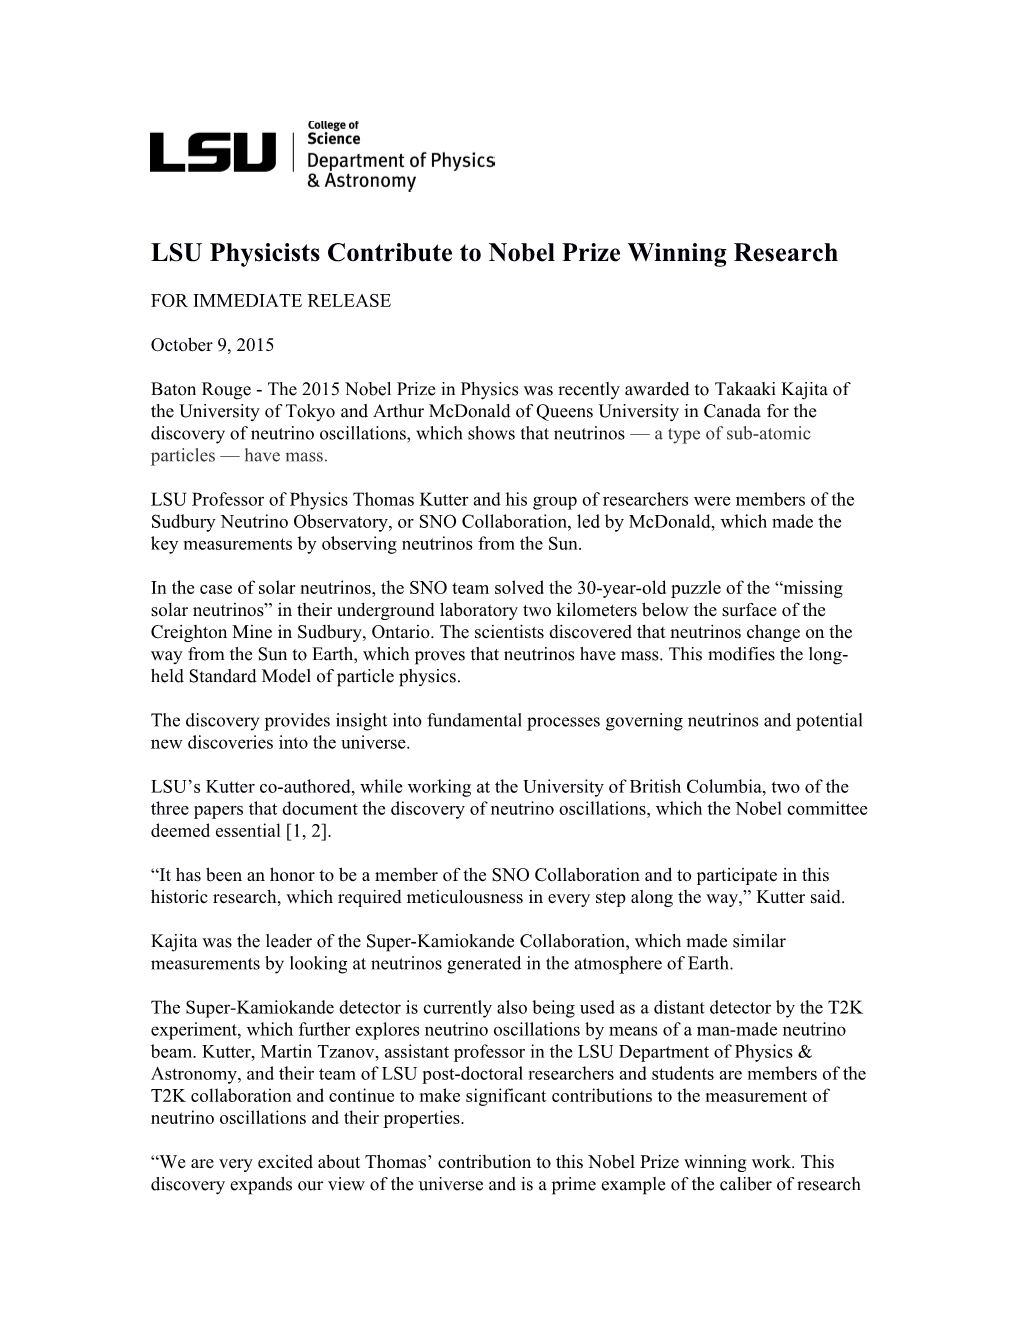 LSU Physicists Contribute to Nobel Prize Winning Research